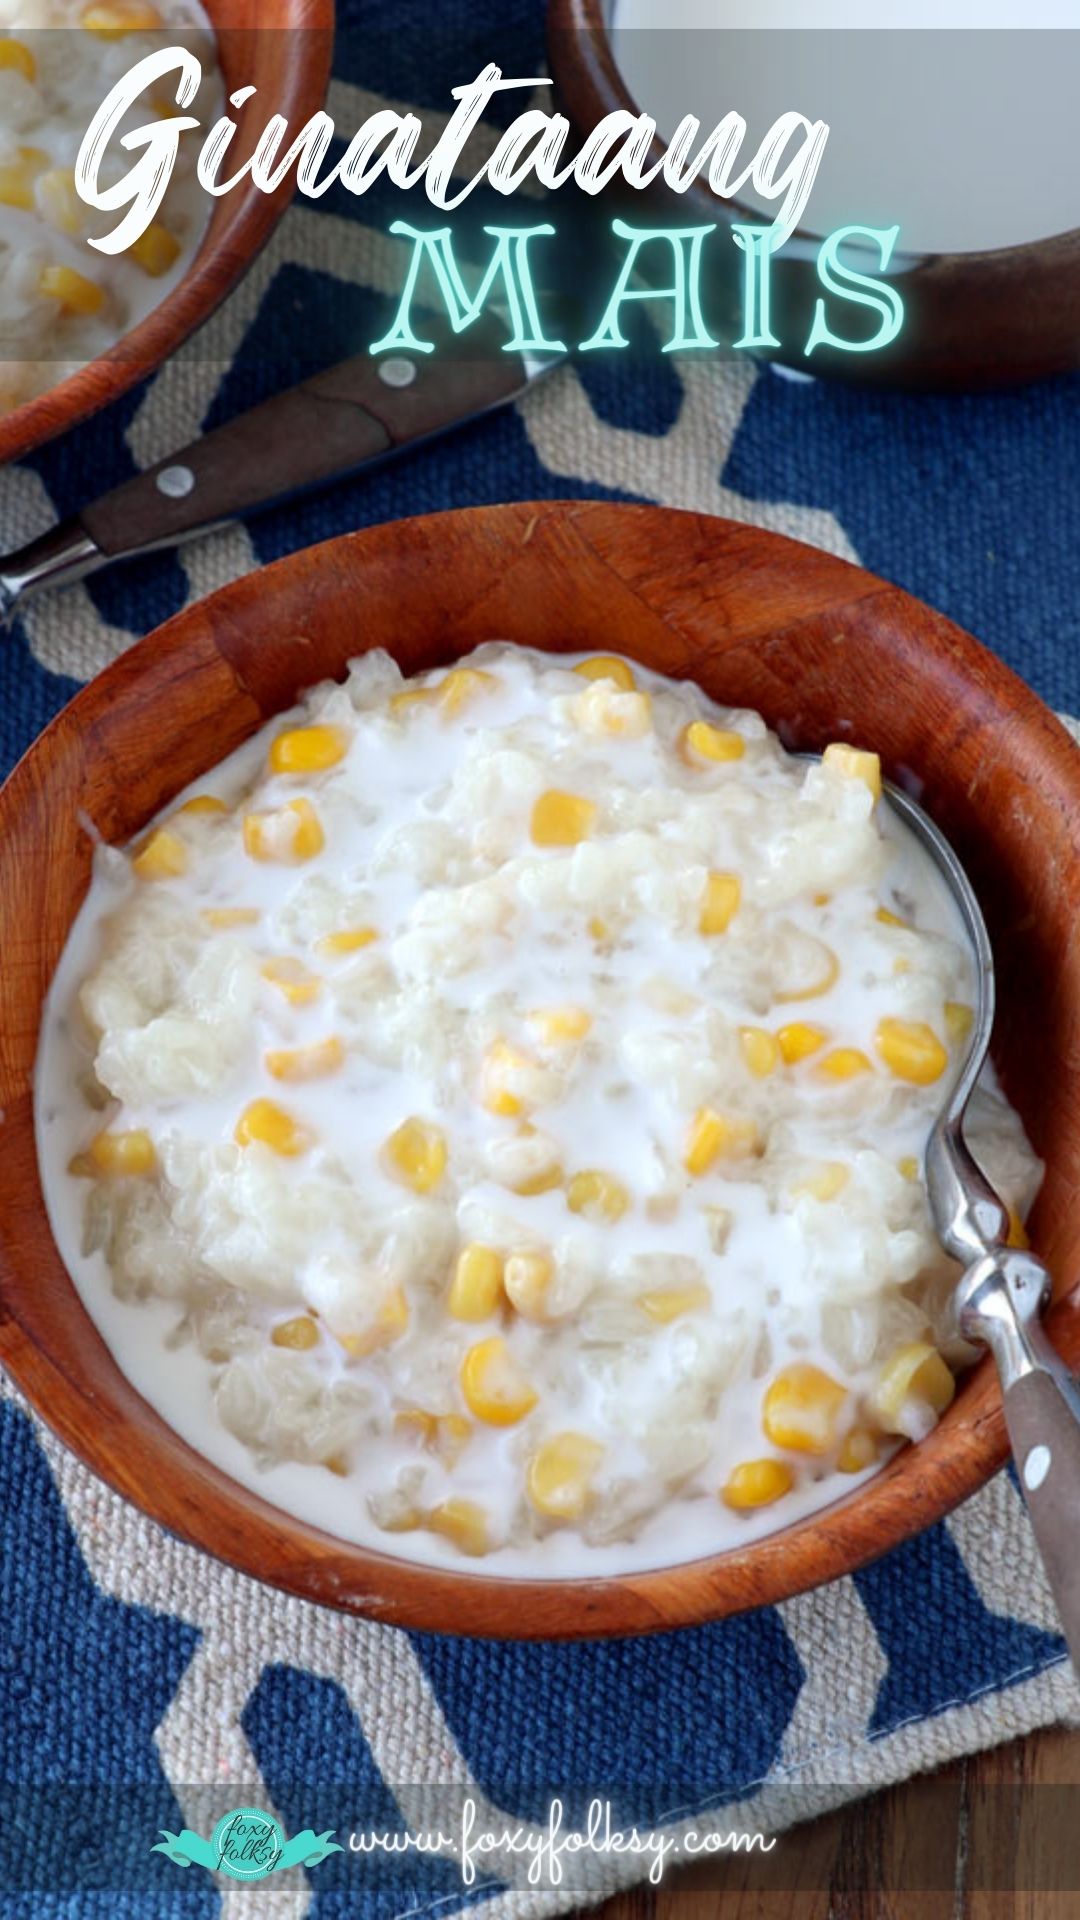 Ginataang mais in a bowl- glutinous rice and corn kernel cooked in coconut milk.